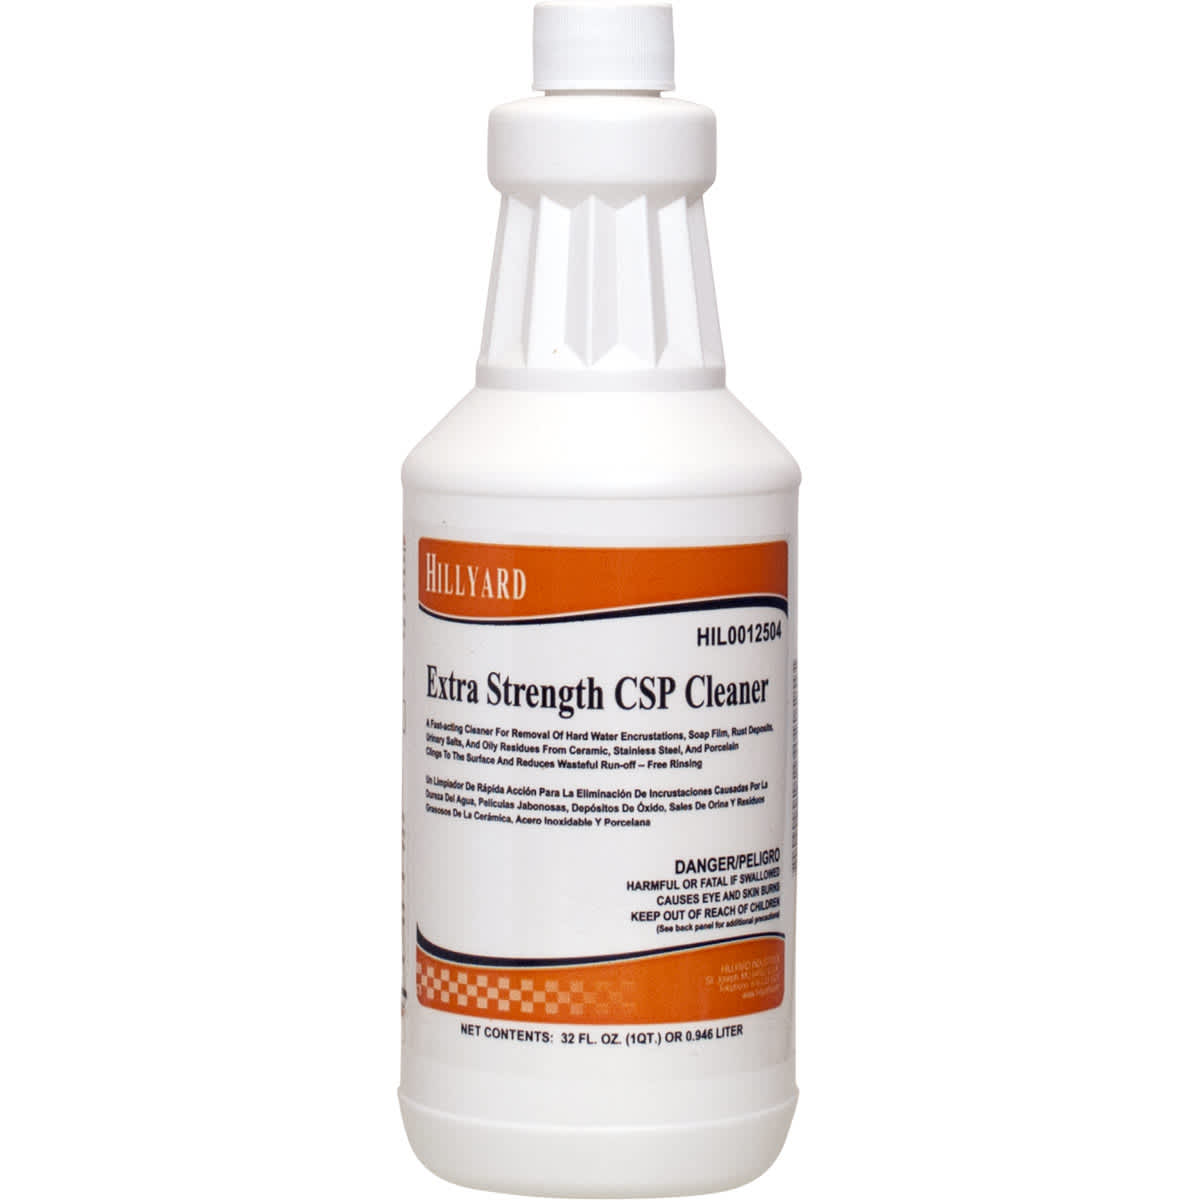 Hillyard Extra Strength CSP Cleaner